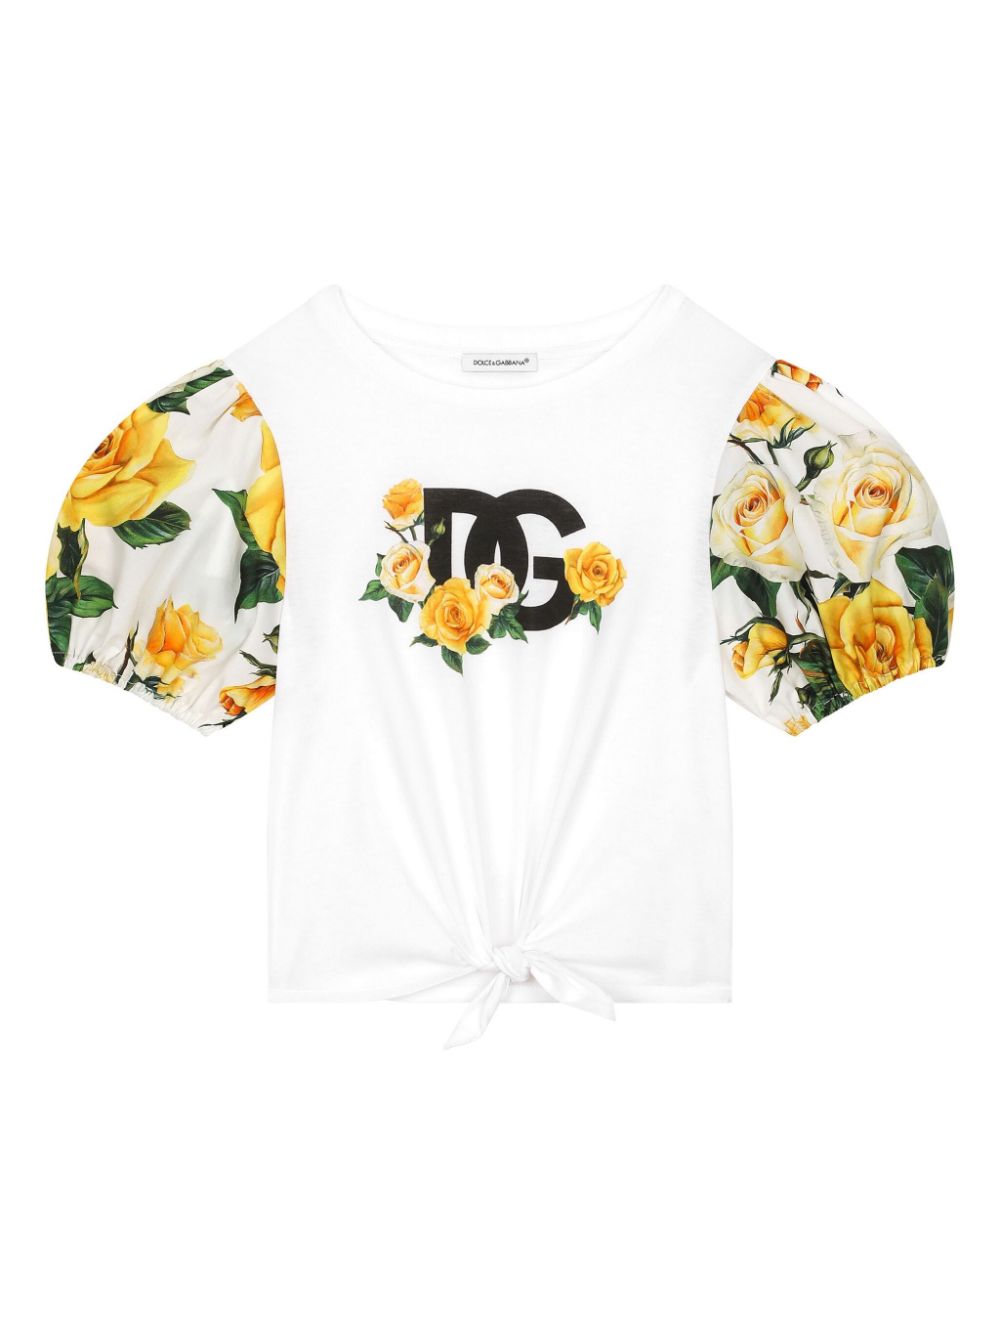 White t-shirt for girls with print